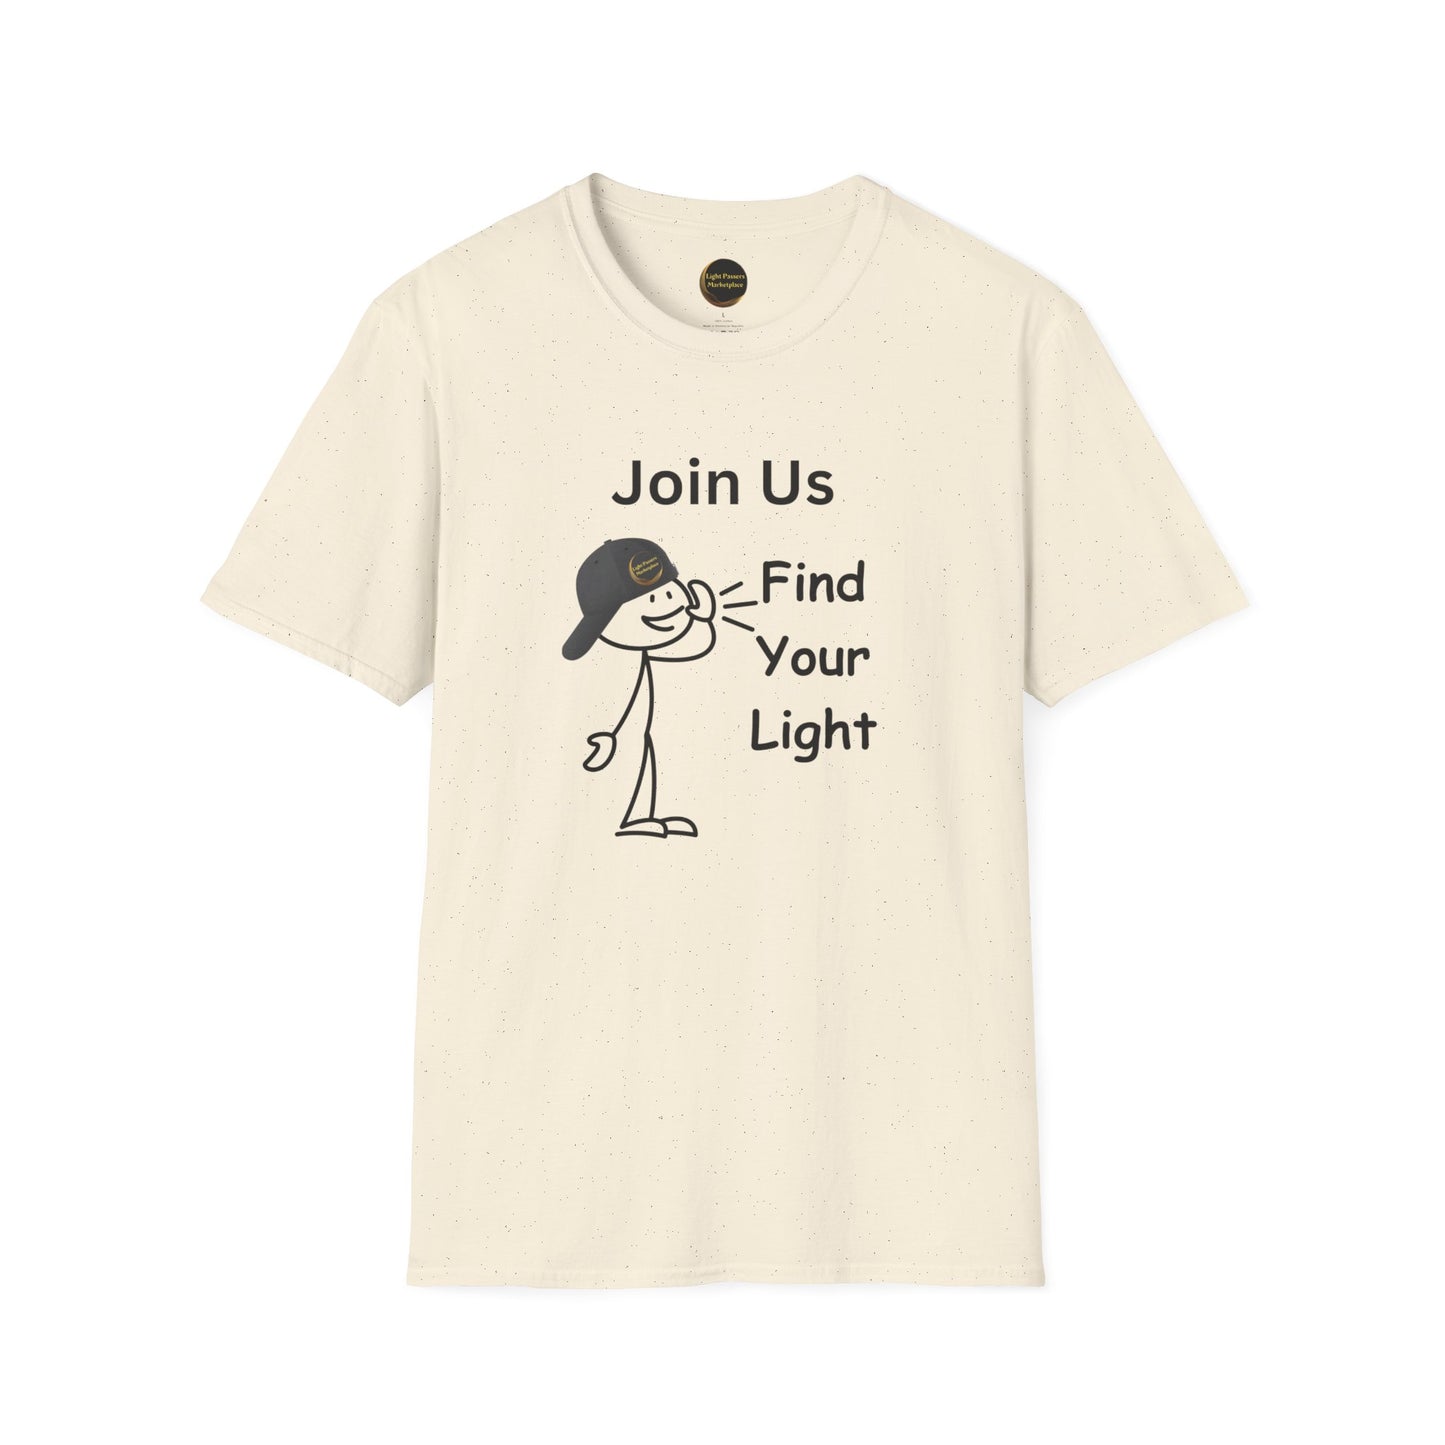 Light Passers Marketplace Calling Join us Find Your Light Unisex Soft T-shirt Simple messages, Inspirational Messages, Mental Health, Inspirational Messages